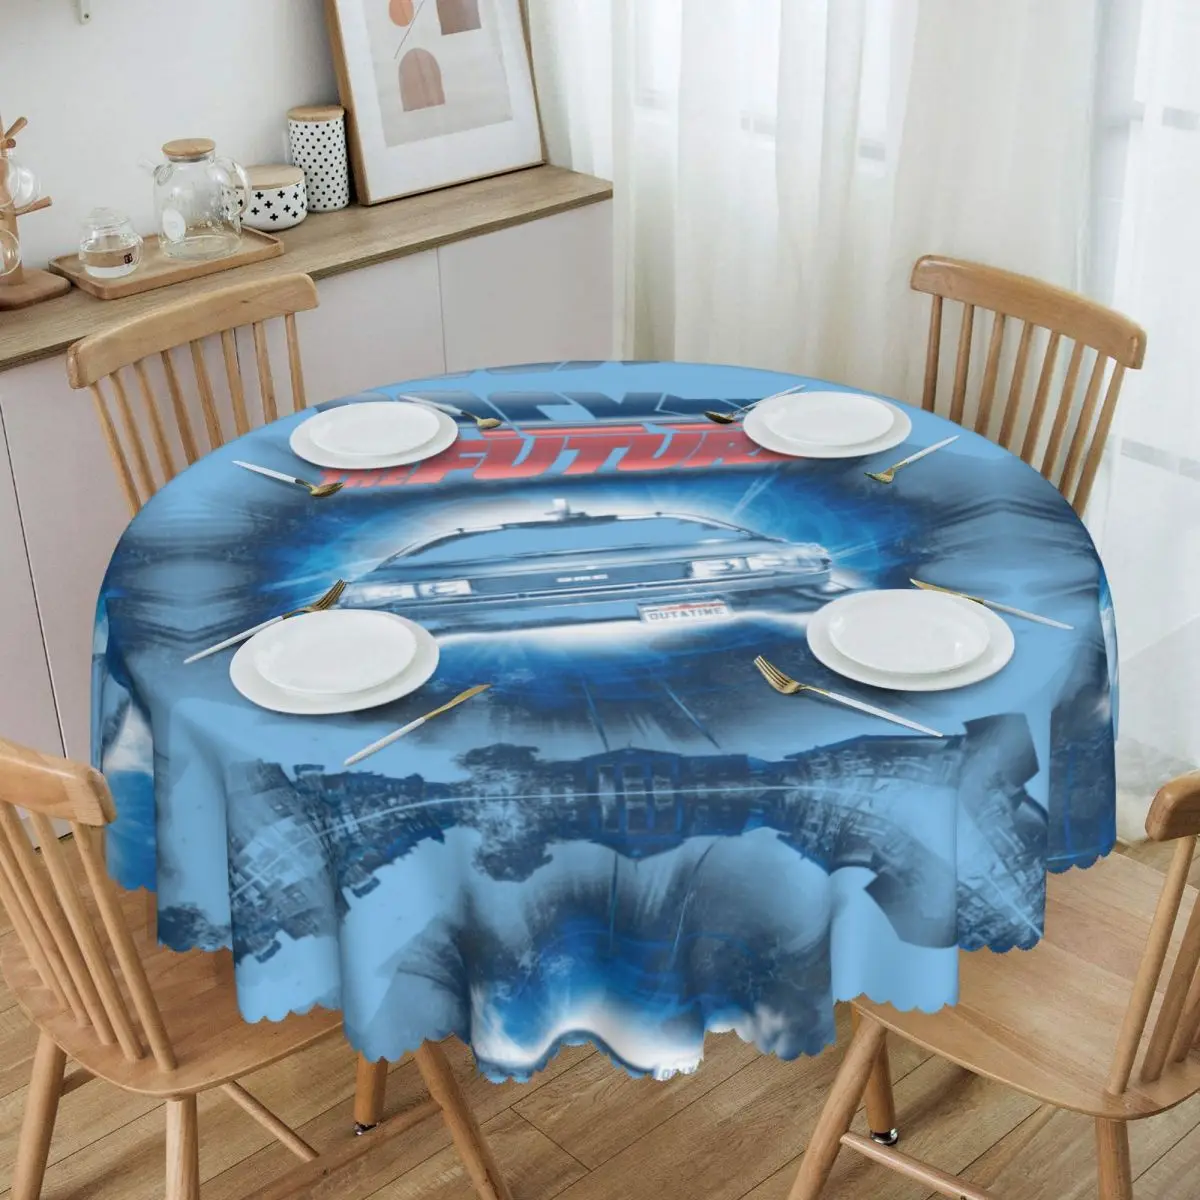 

Fashion Back To The Future Tablecloth Round Waterproof Sci-fi Adventure Film Table Cover Cloth for Kitchen 60 inches